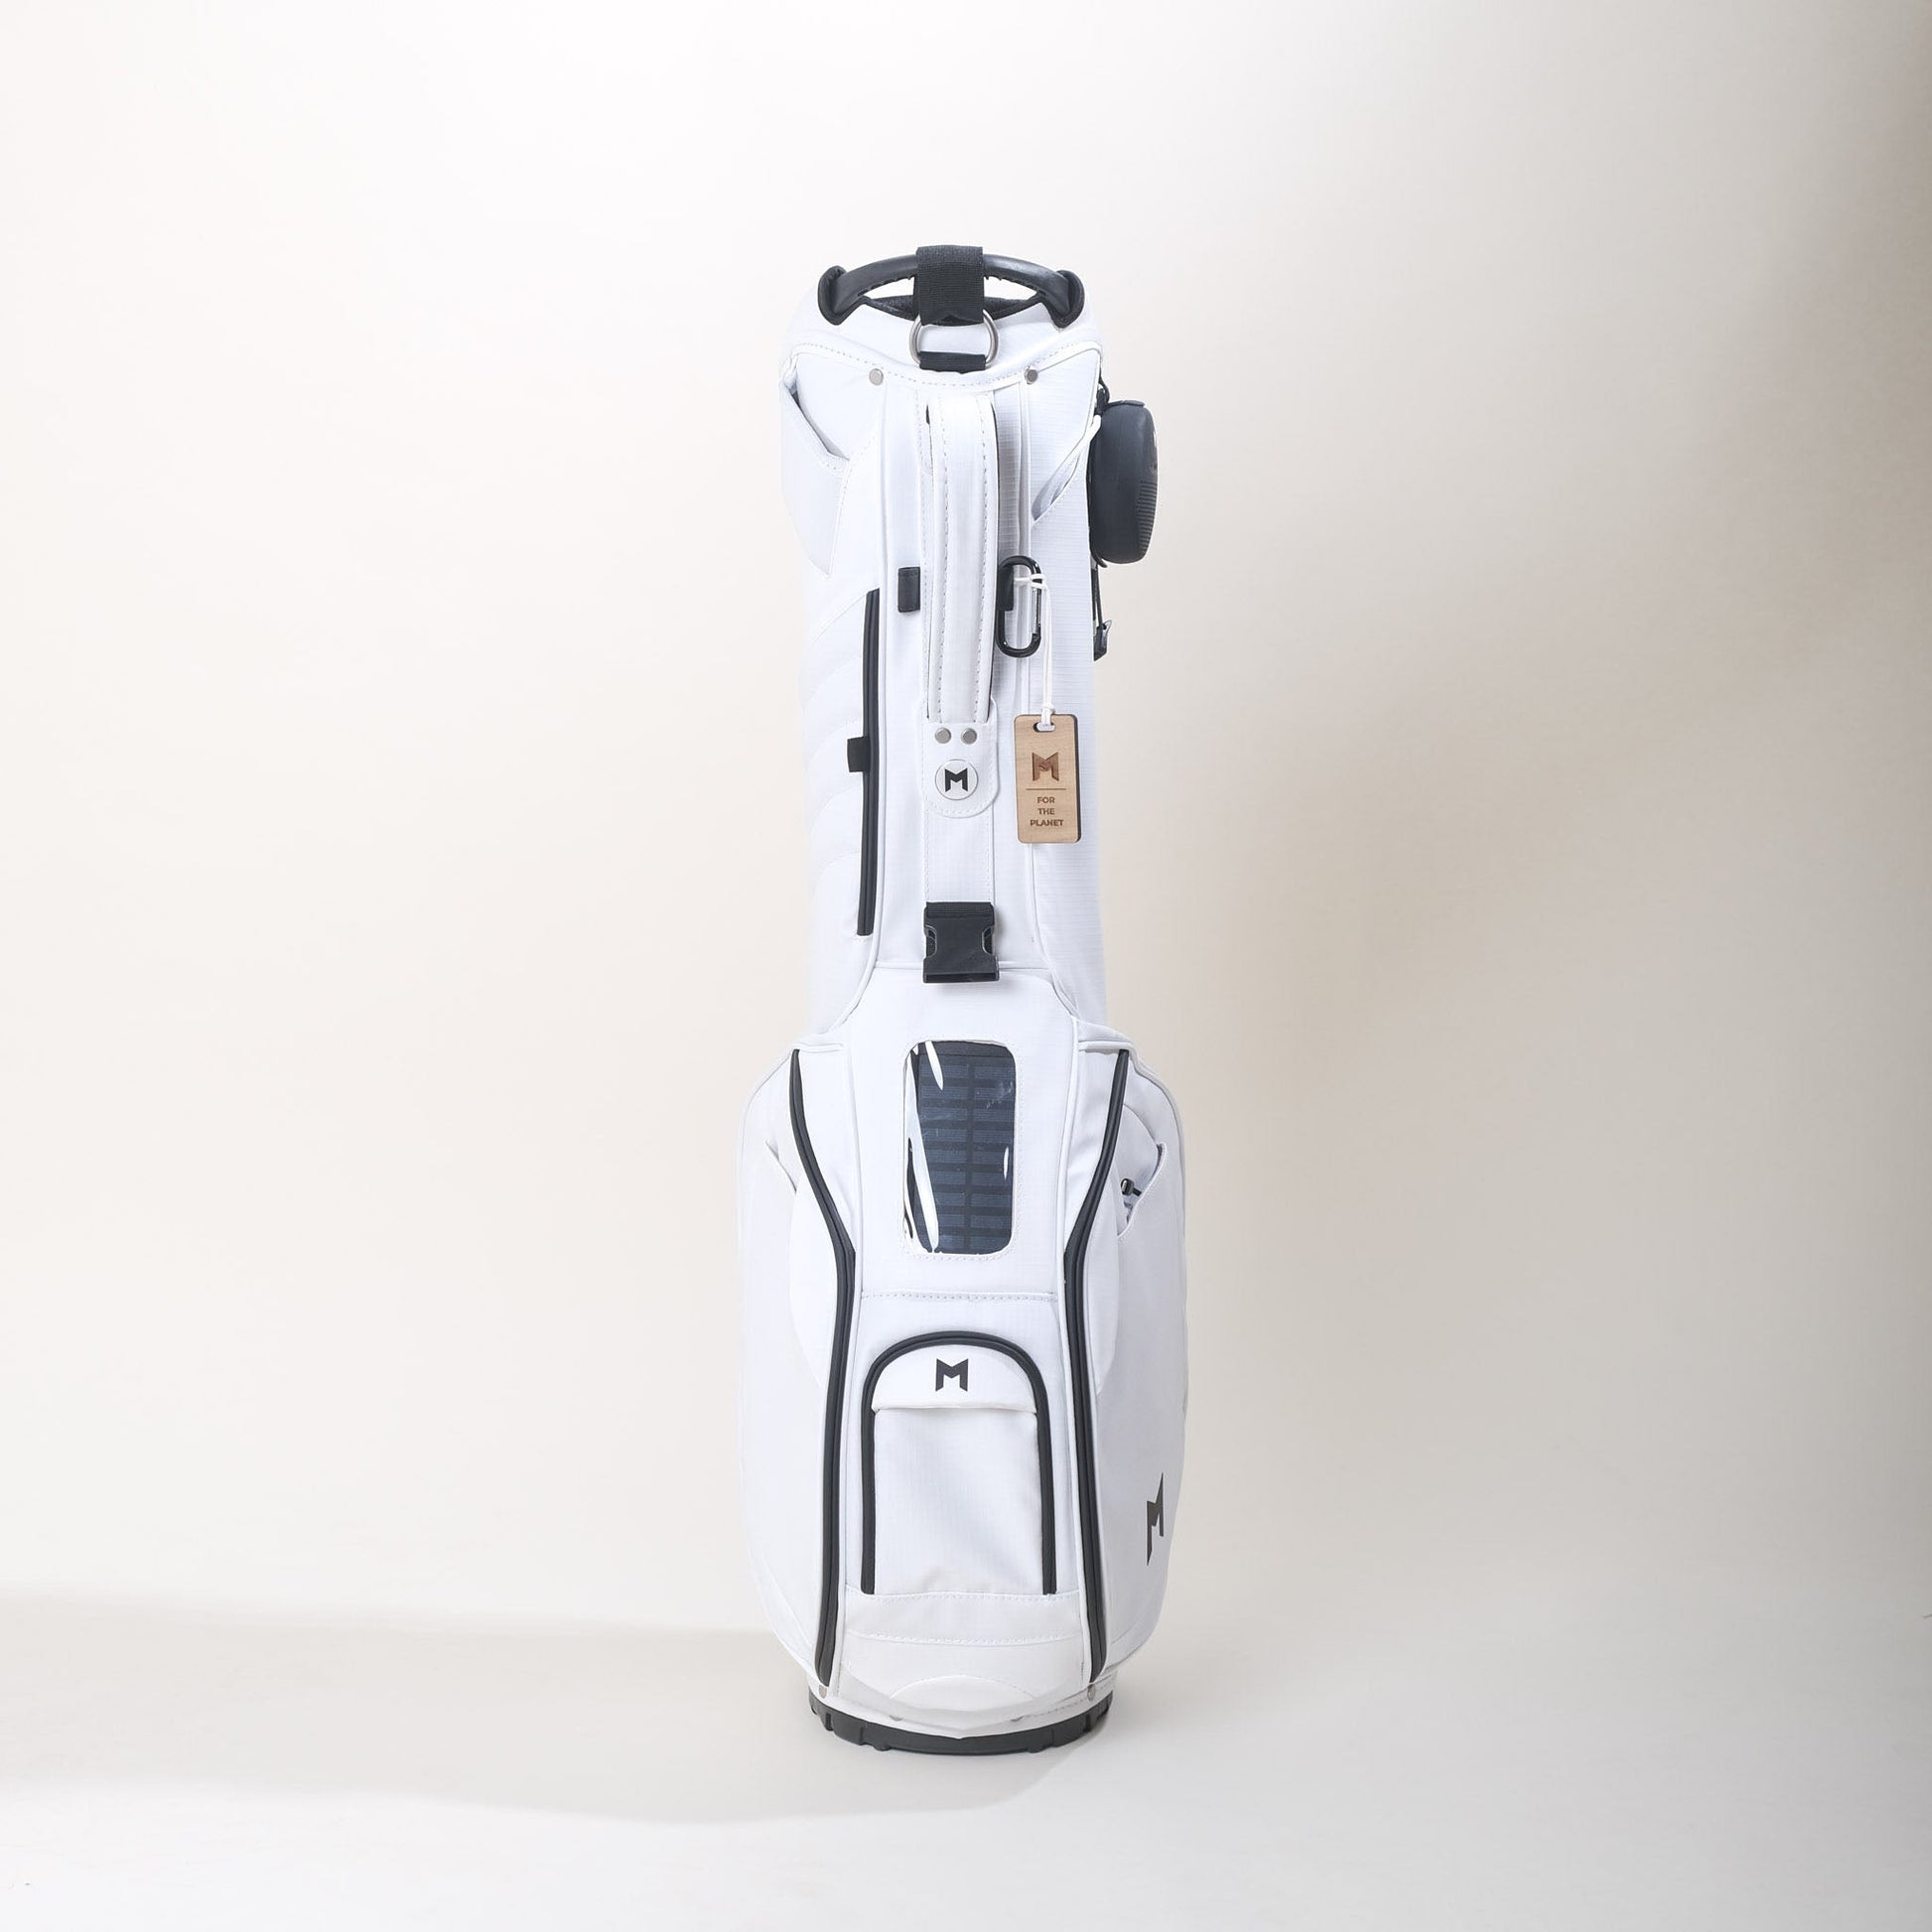 The new, white MNML GOLF bag available in Trade It Forward Program. Send in your old bag to support a junior golfer.